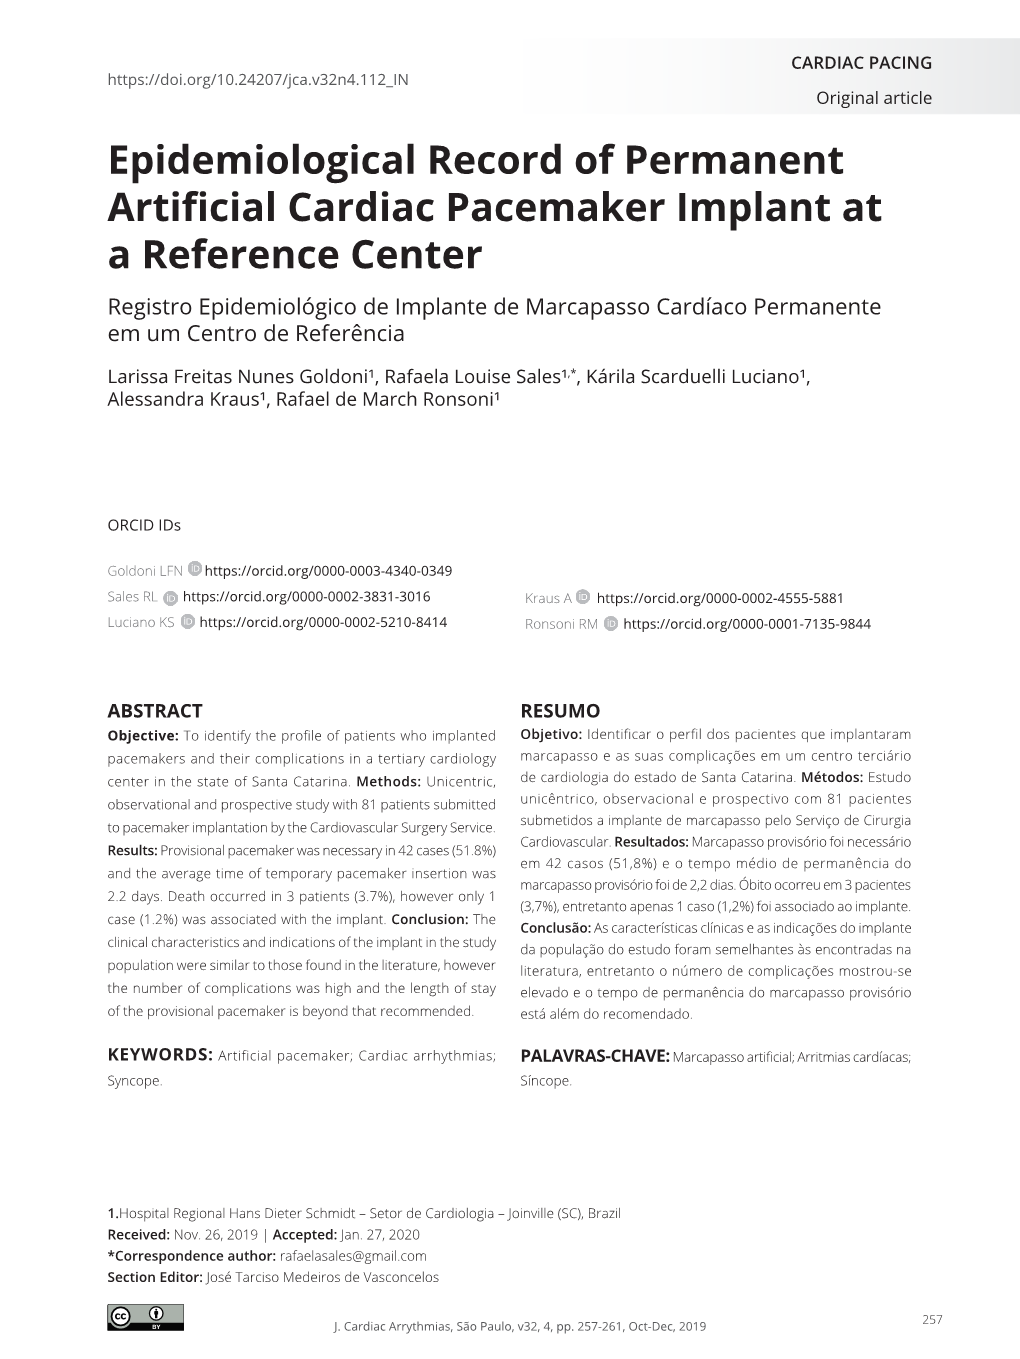 Epidemiological Record of Permanent Artificial Cardiac Pacemaker